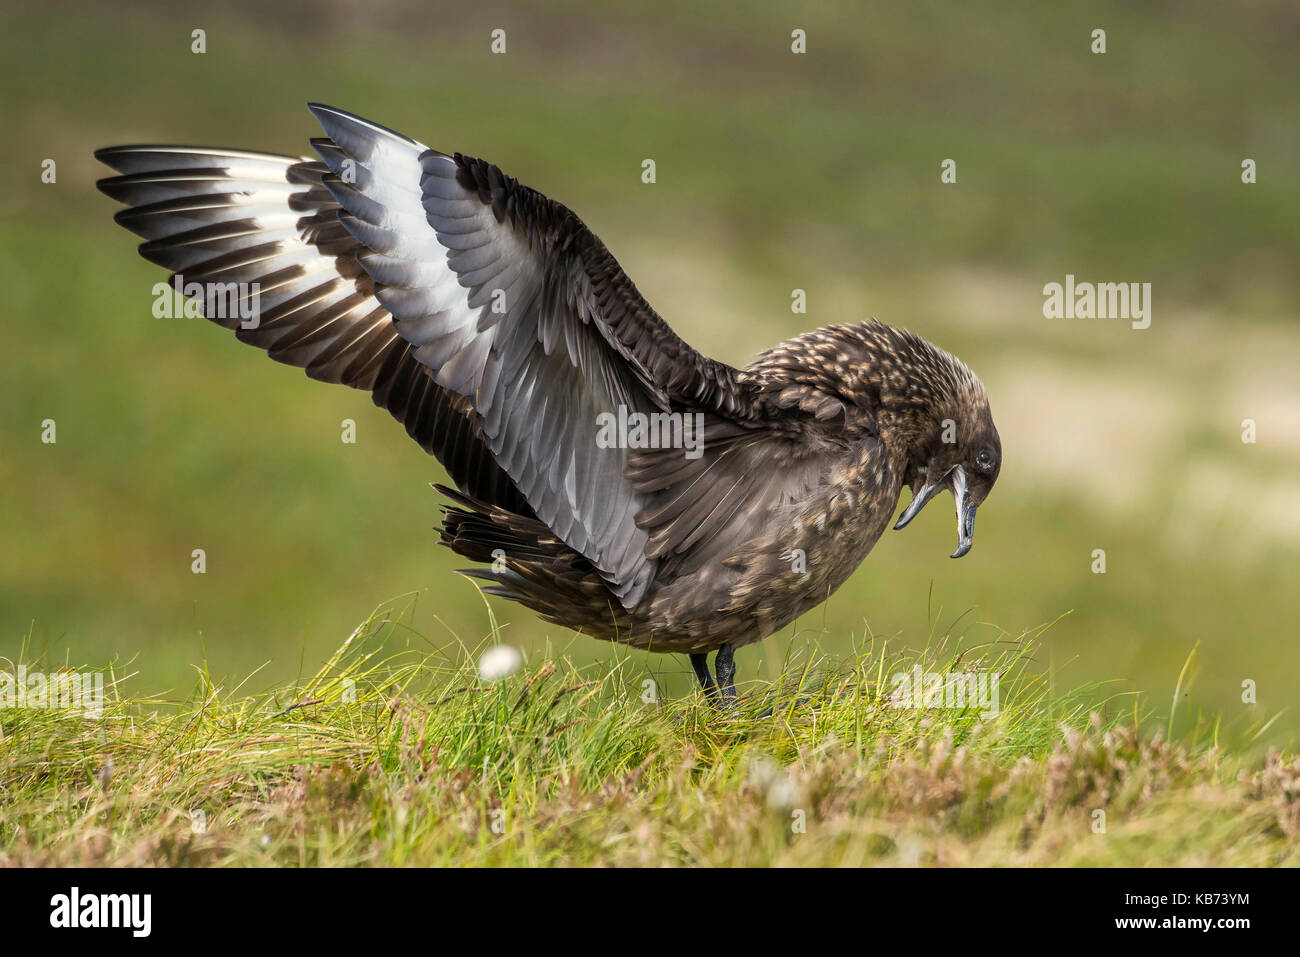 Great Skua (Stercorarius skua) calling with stretched wings and head bowed to impress intruders, Norway, More og Romsdal, Runde island Stock Photo